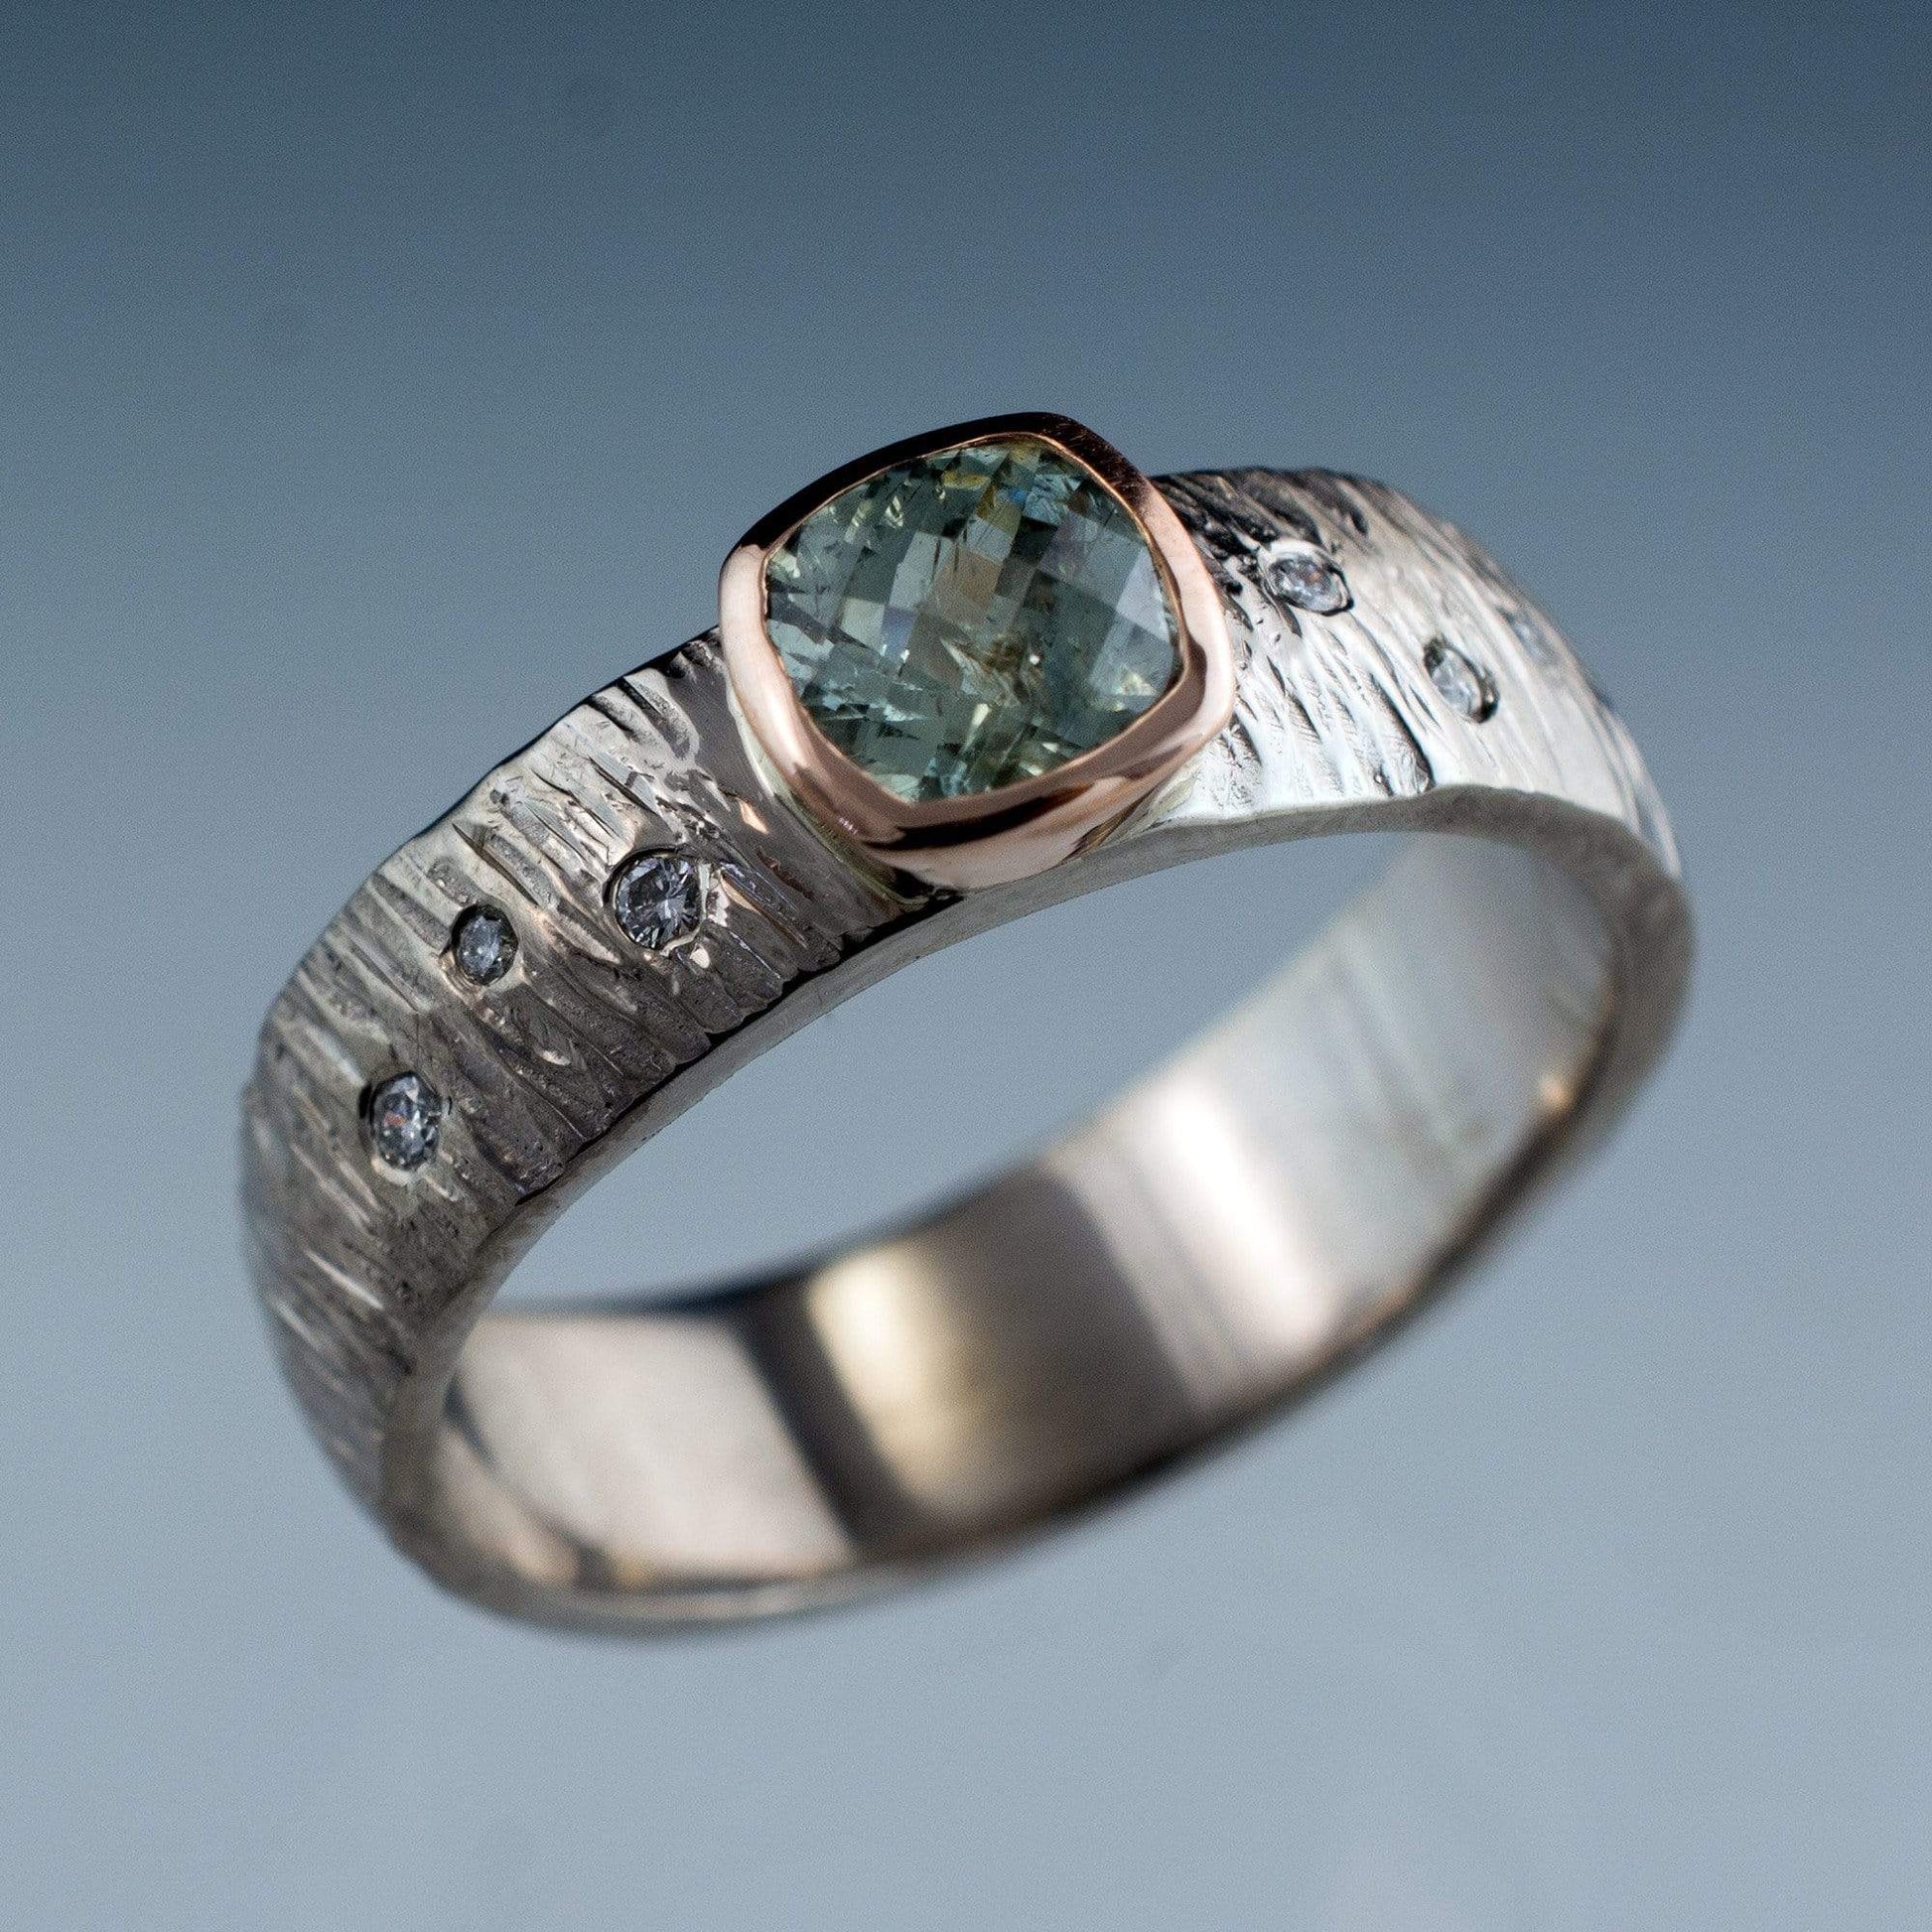 Textured Engagement Ring with Fair Trade Green Cushion Cut Sapphire & Diamonds Accents Ring by Nodeform